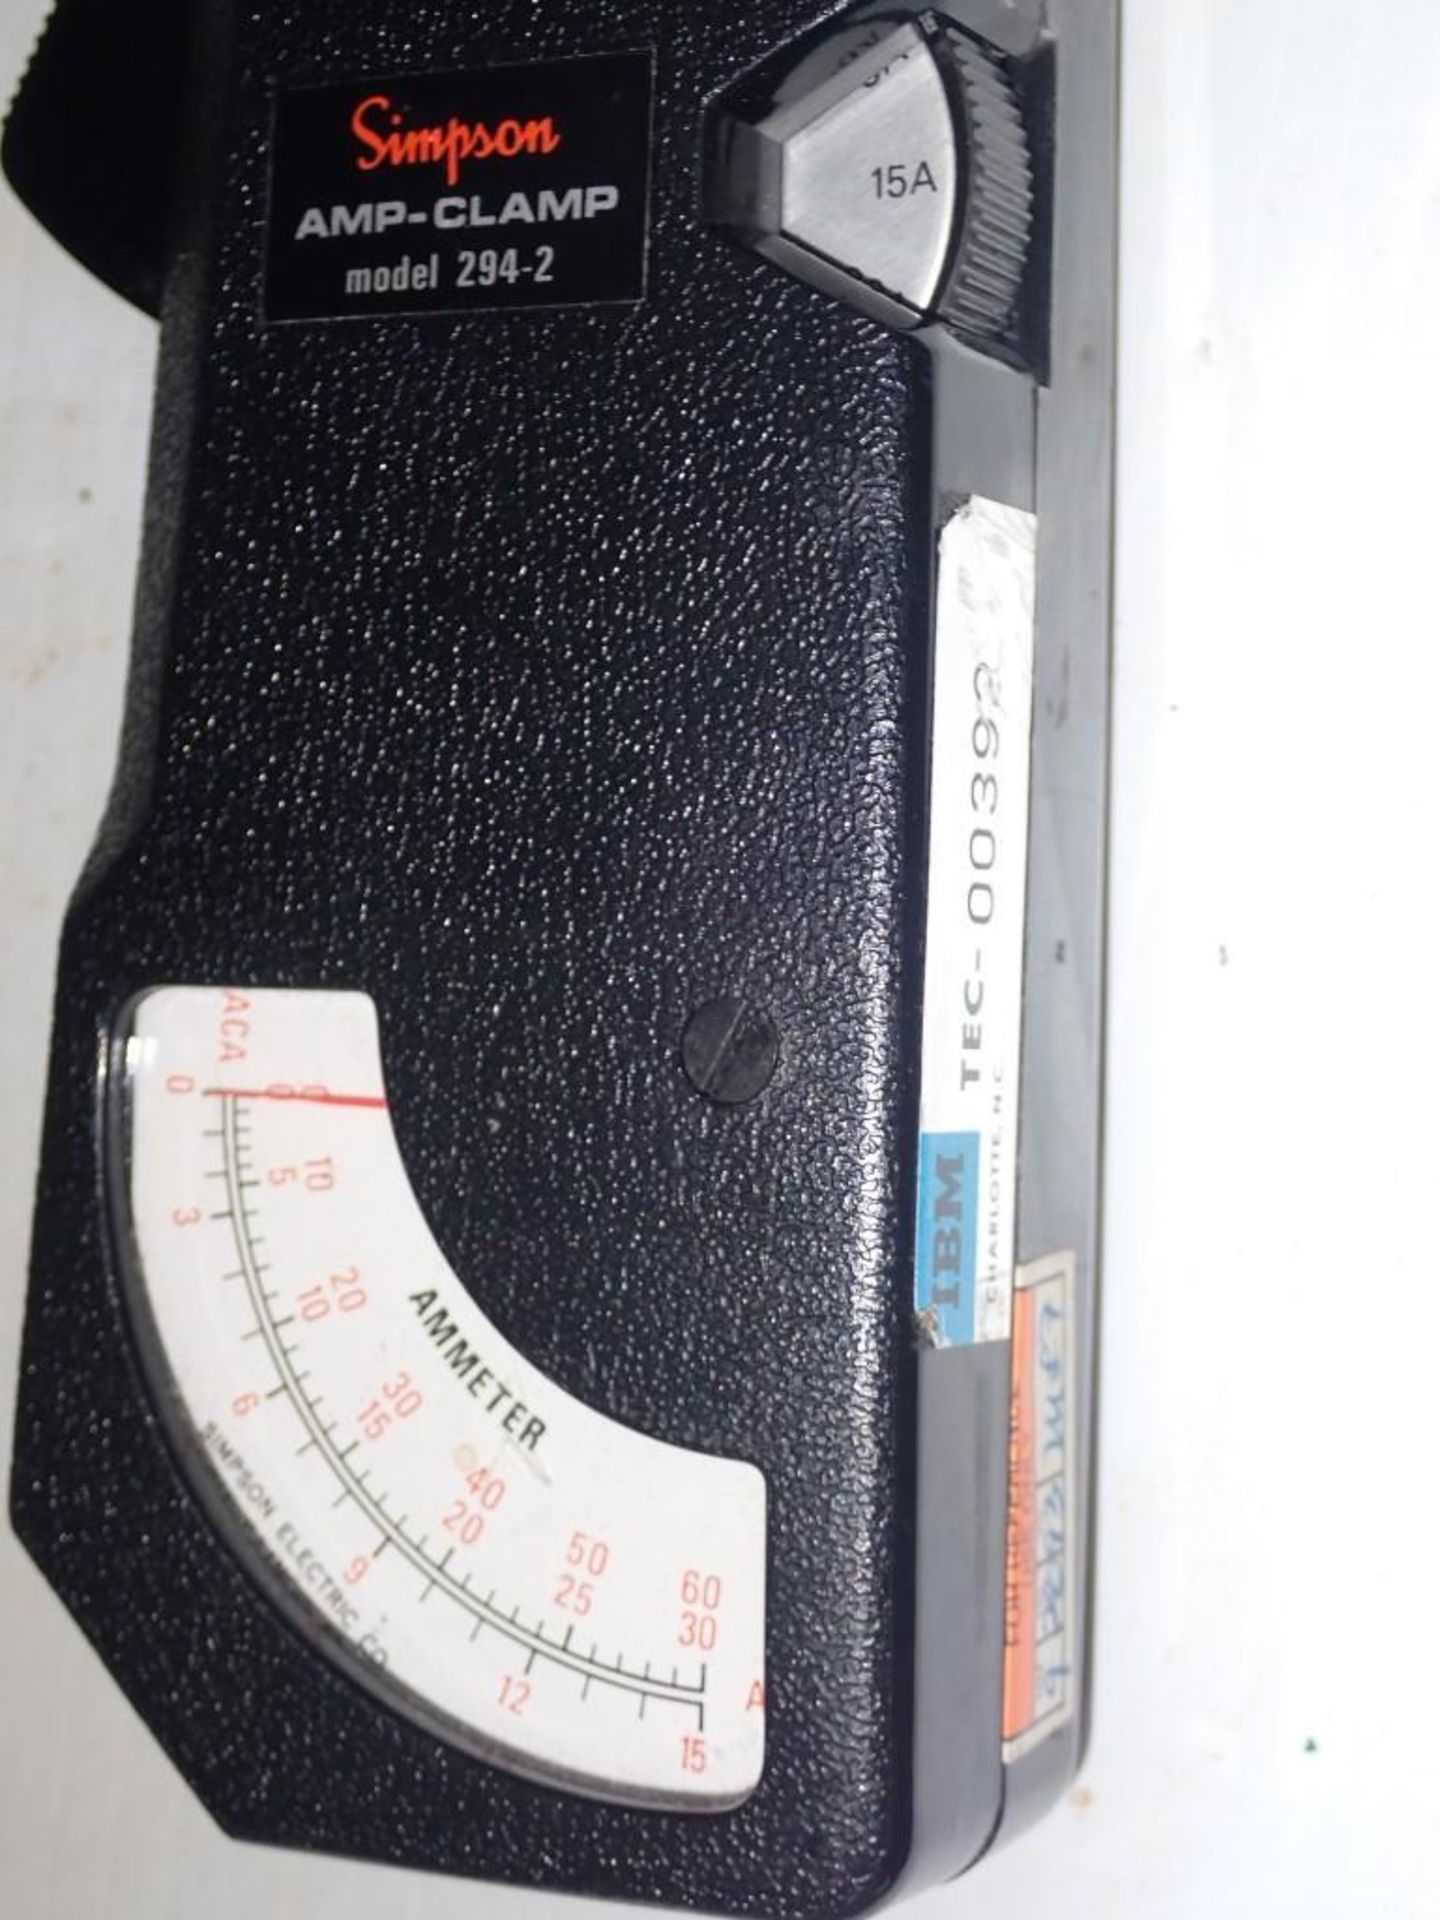 Simpson #294 - 2 Clamp On Amp Meter - Image 3 of 4